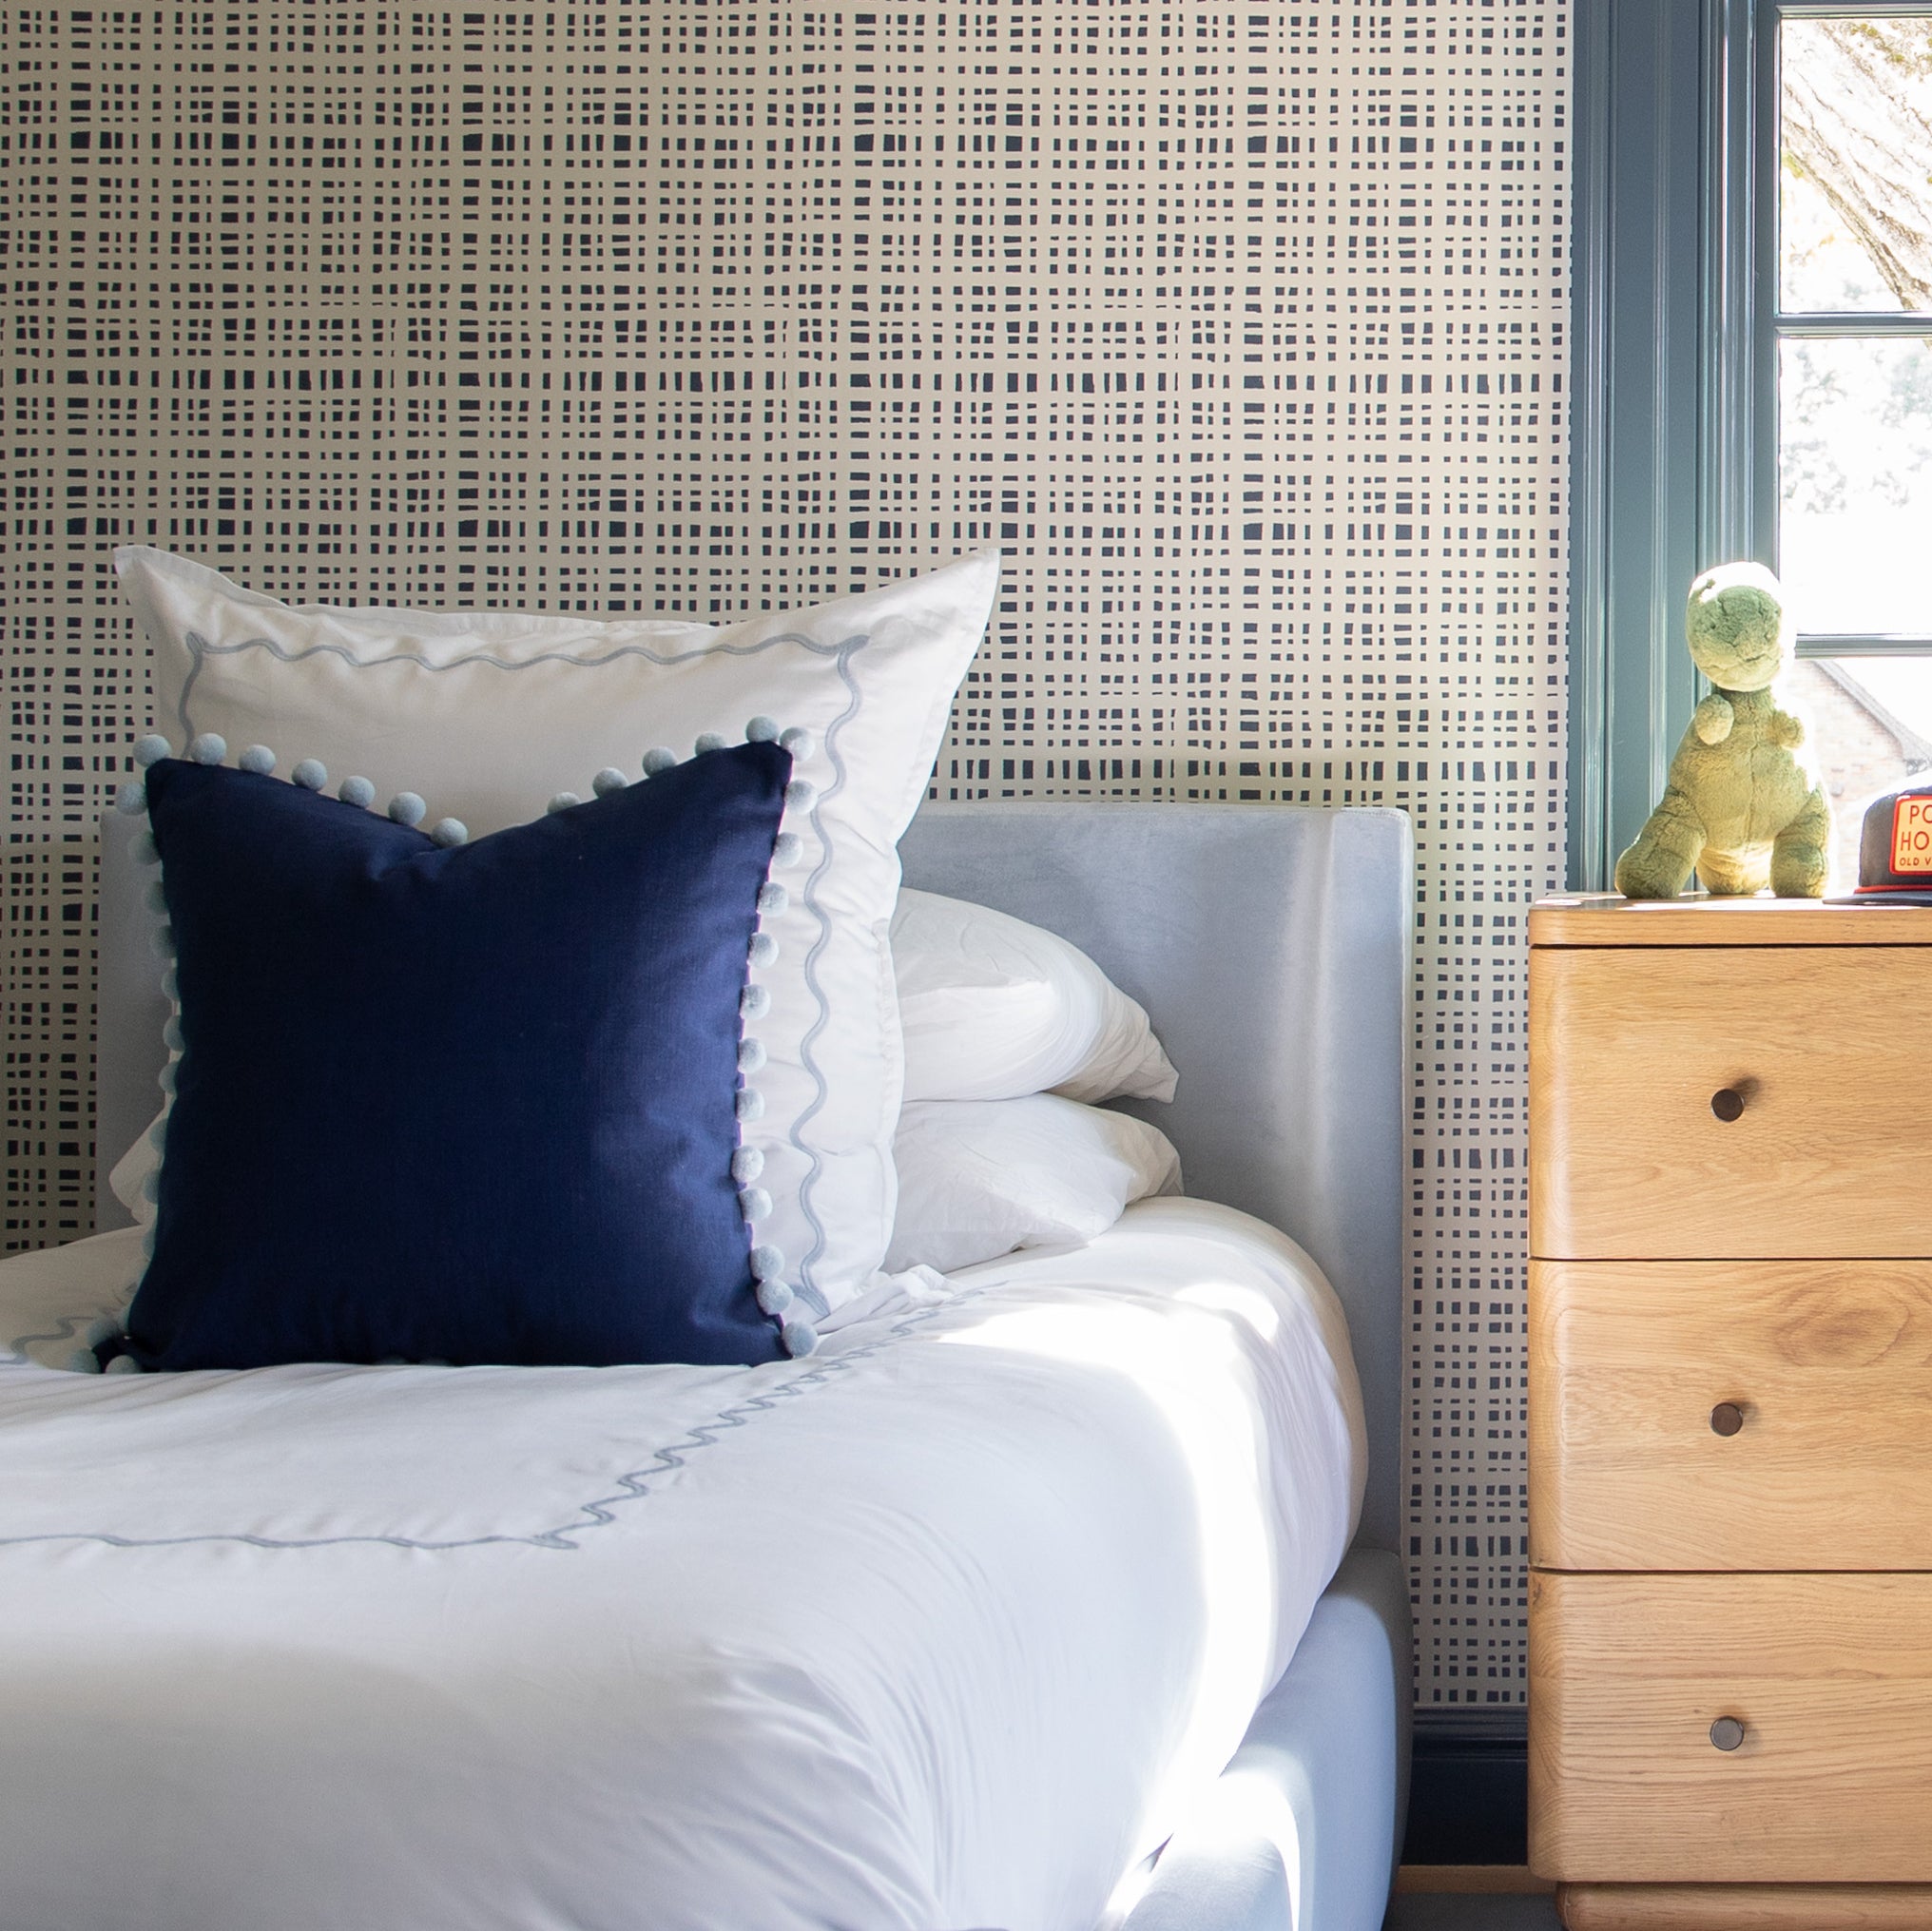 Bedroom styled with navy gingham printed wallpaper and navy blue pillow with sky blue pom pom on white bed with sky blue velvet headboard by wooden dresser in front of window